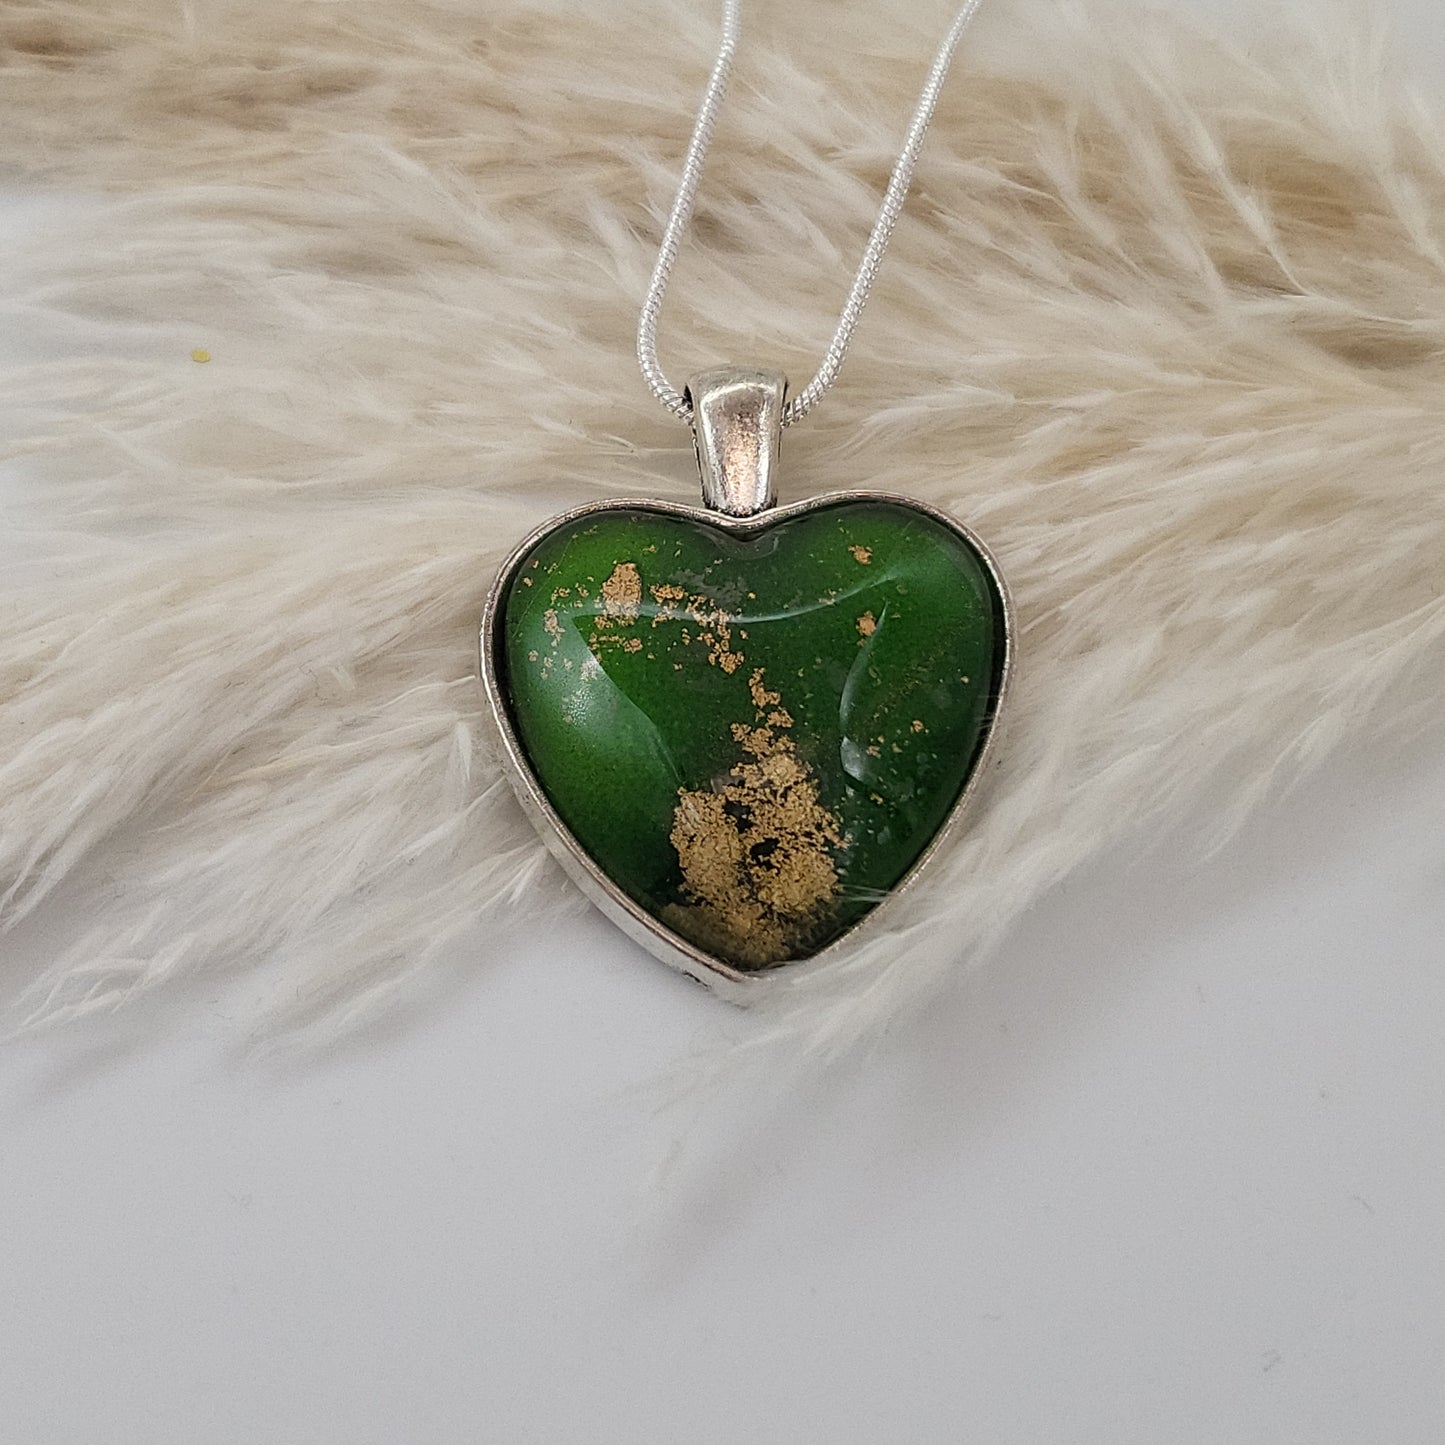 Green & Gold Heart Shaped Necklace